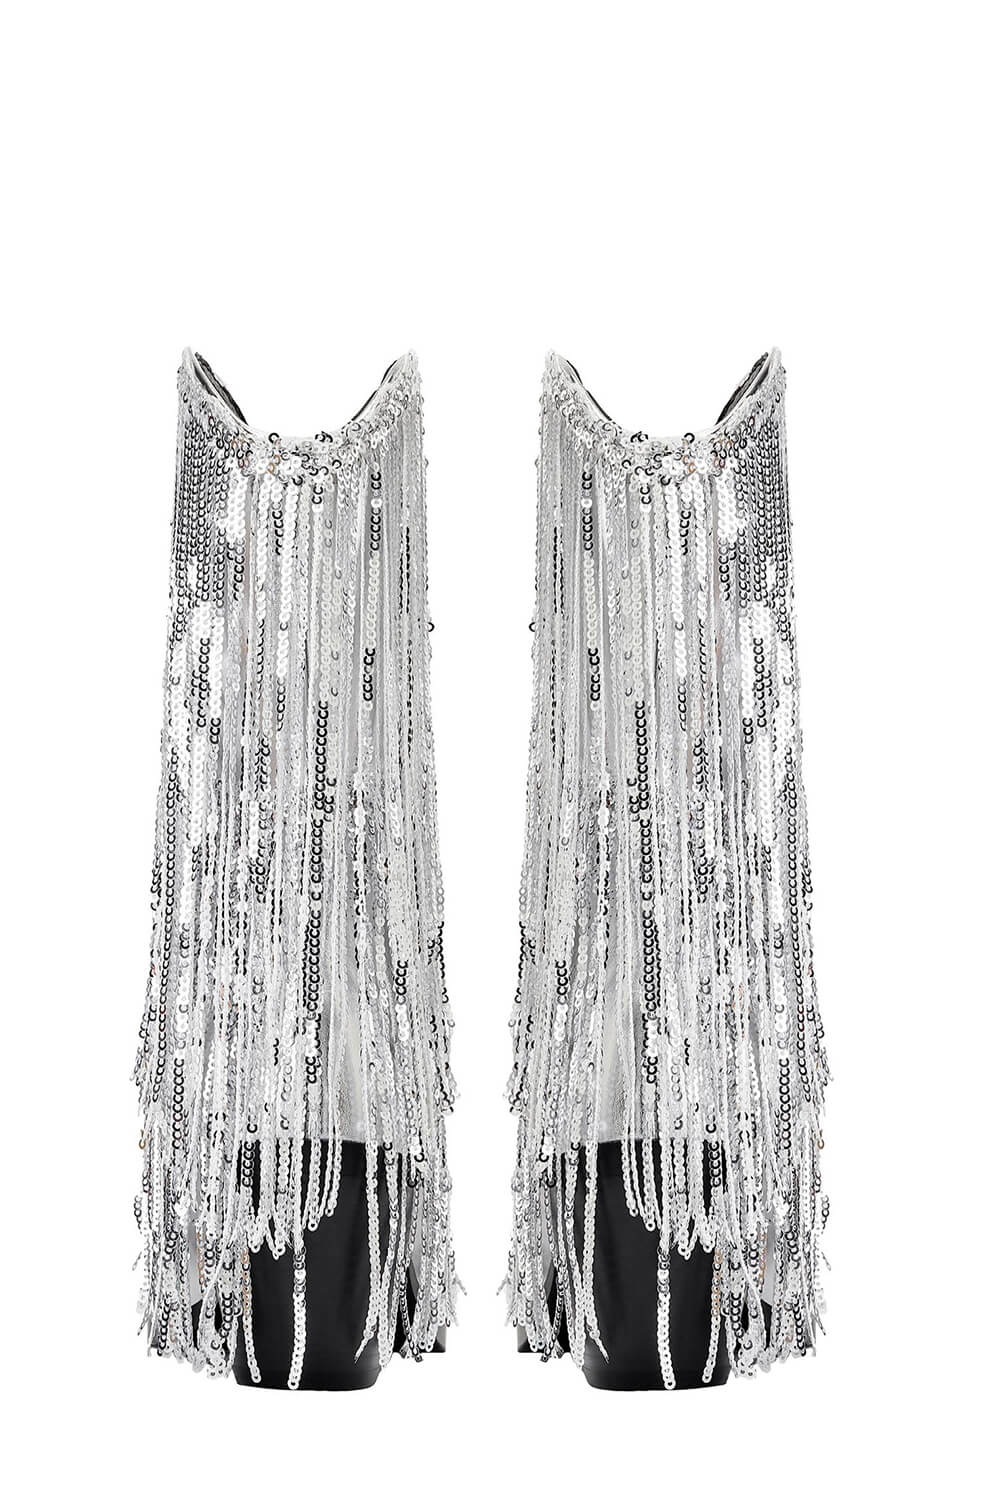 Silver Metallic Patent Sequined Fringe Western Ankle Bootie